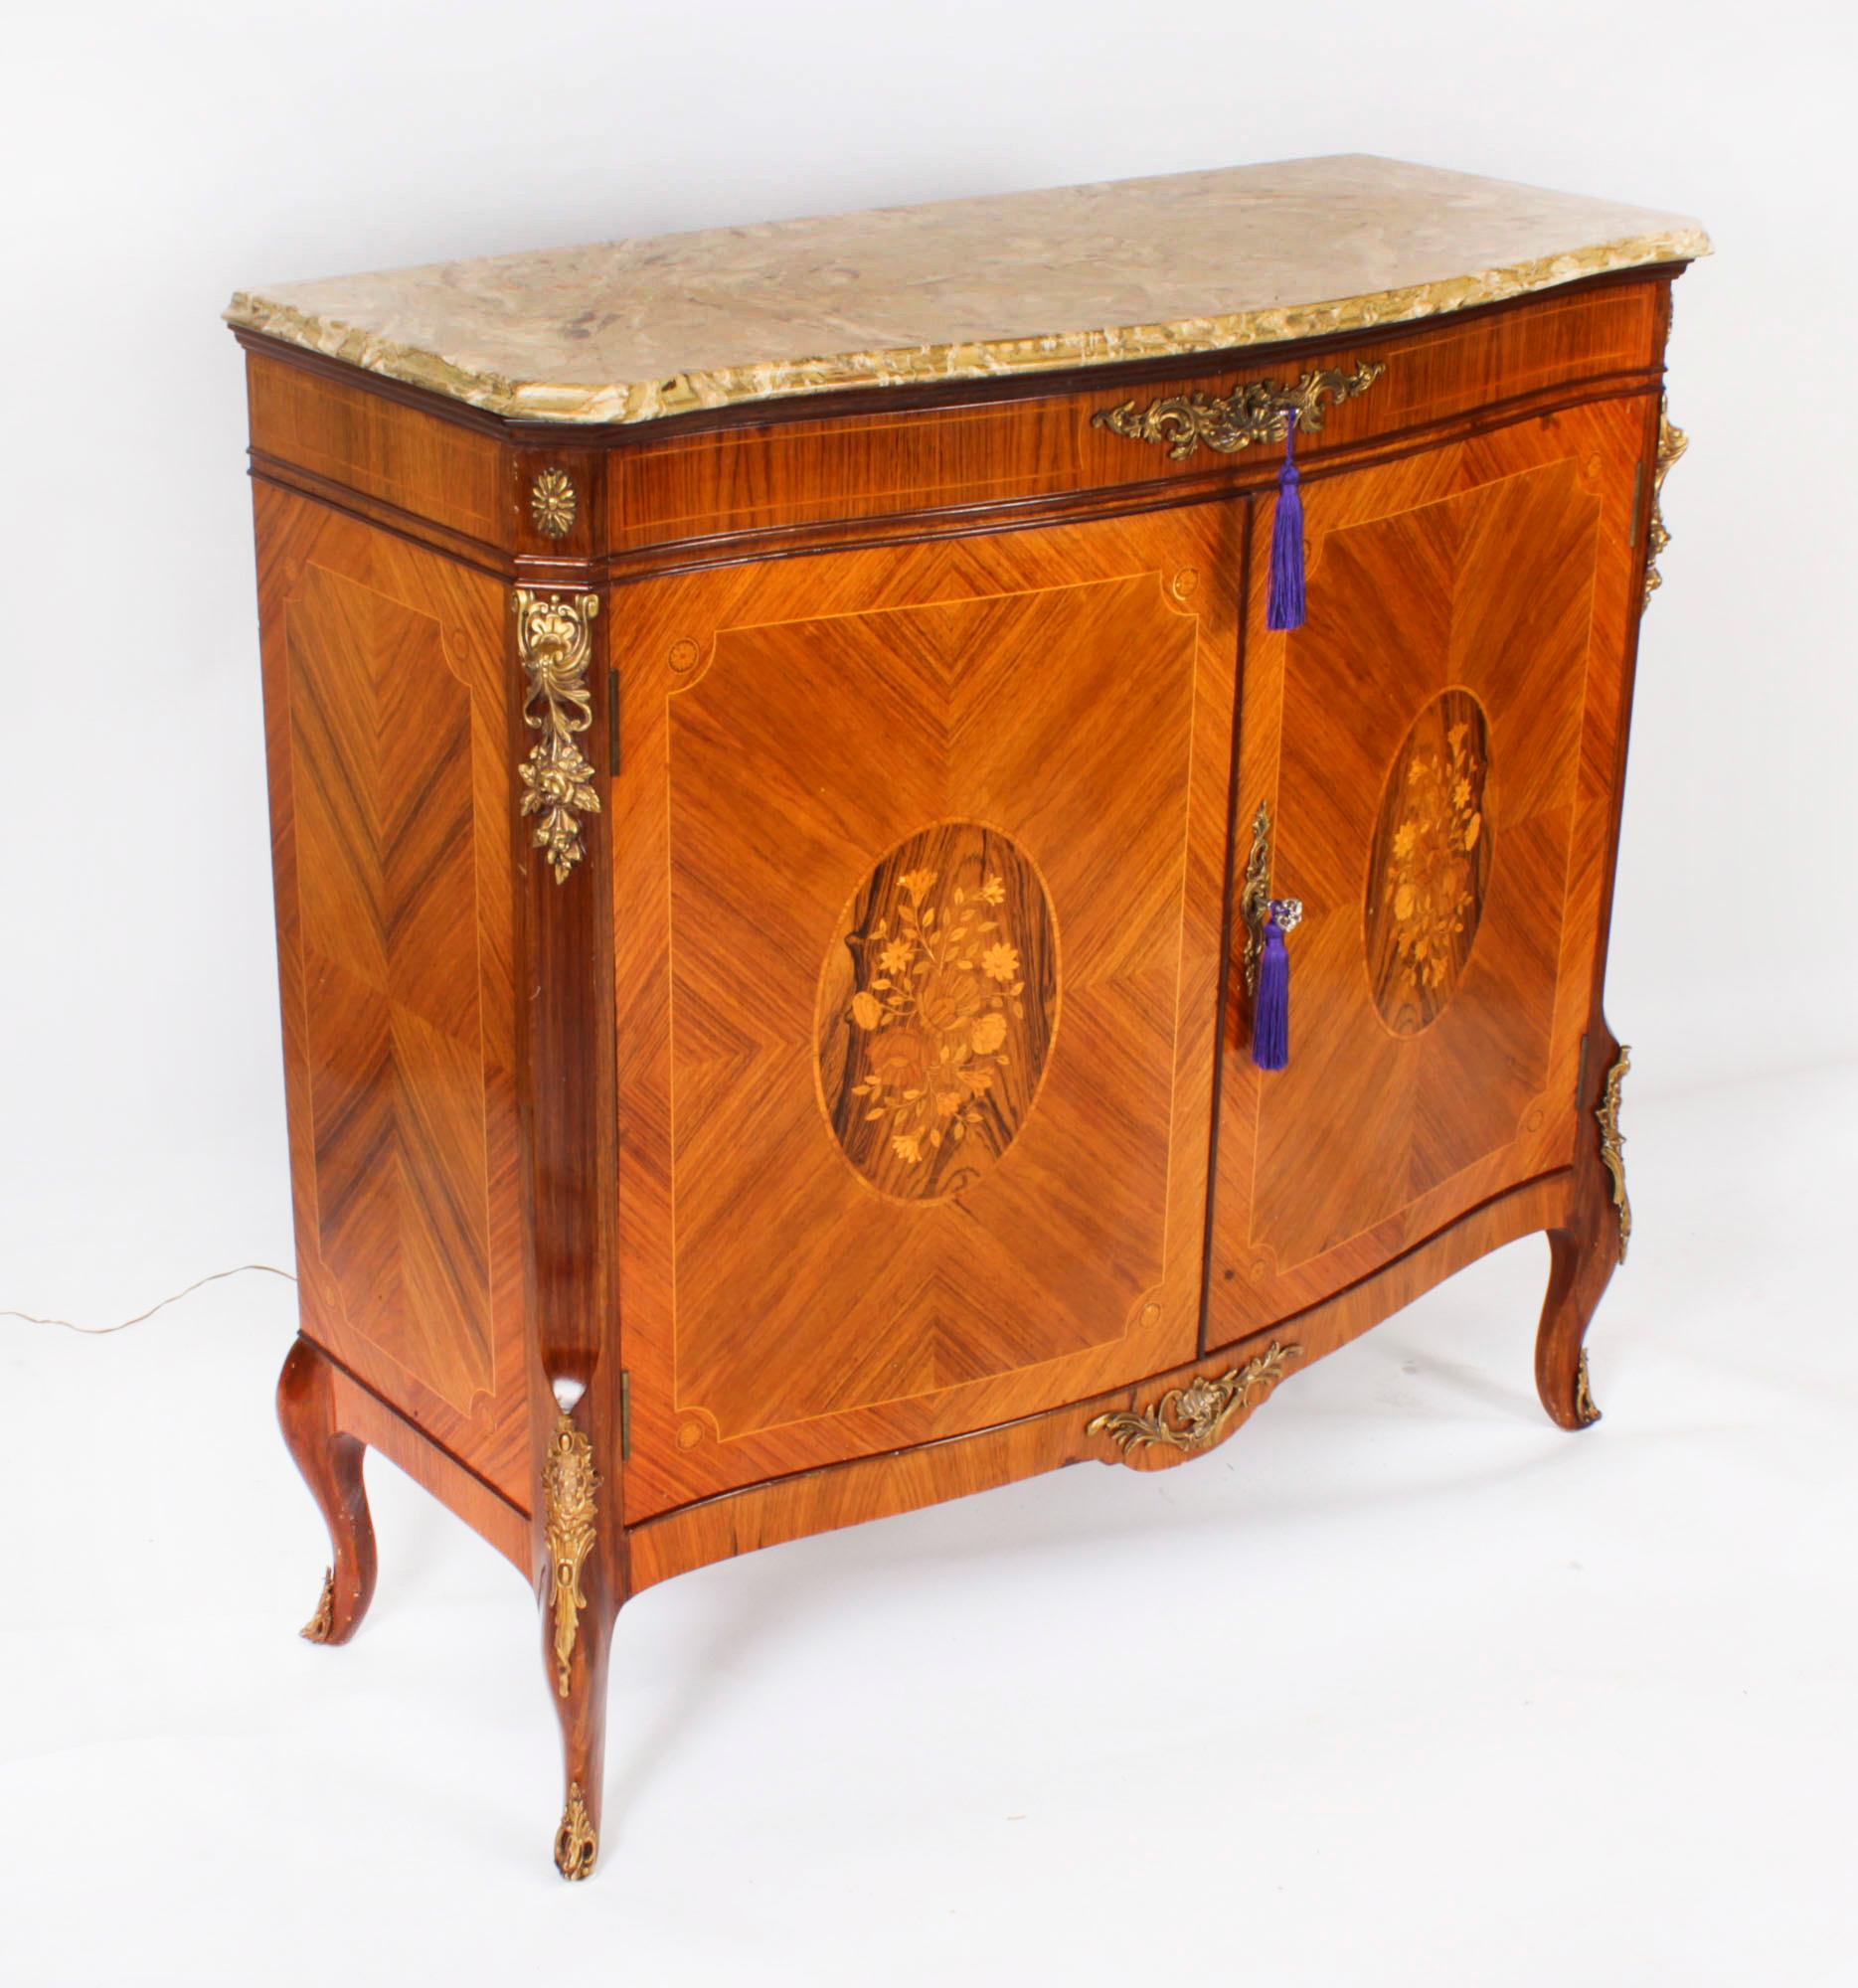 This is a fantastic vintage wood cocktail cabinet with fabulous ormolu mounts, exquisite floral marquetry decoration and an elegant 'Marmo di Brescia' marble top, circa 1950 in date and by the renowned makers of bespoke furniture, Epstein Bros.

The